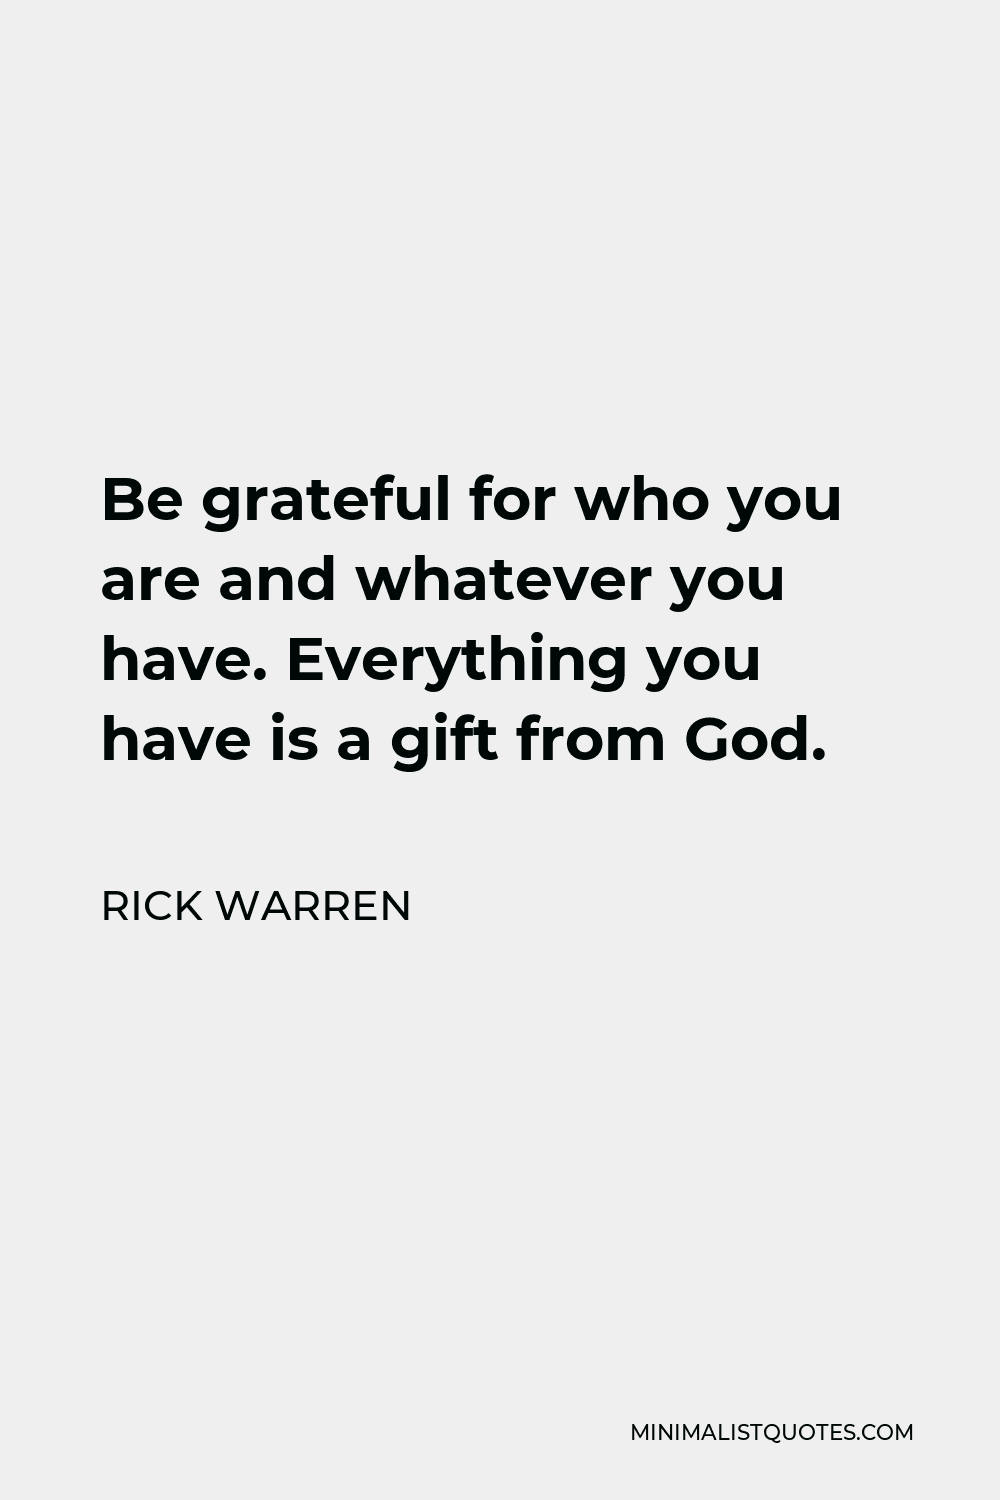 Rick Warren Quote - Be grateful for who you are and whatever you have. Everything you have is a gift from God.